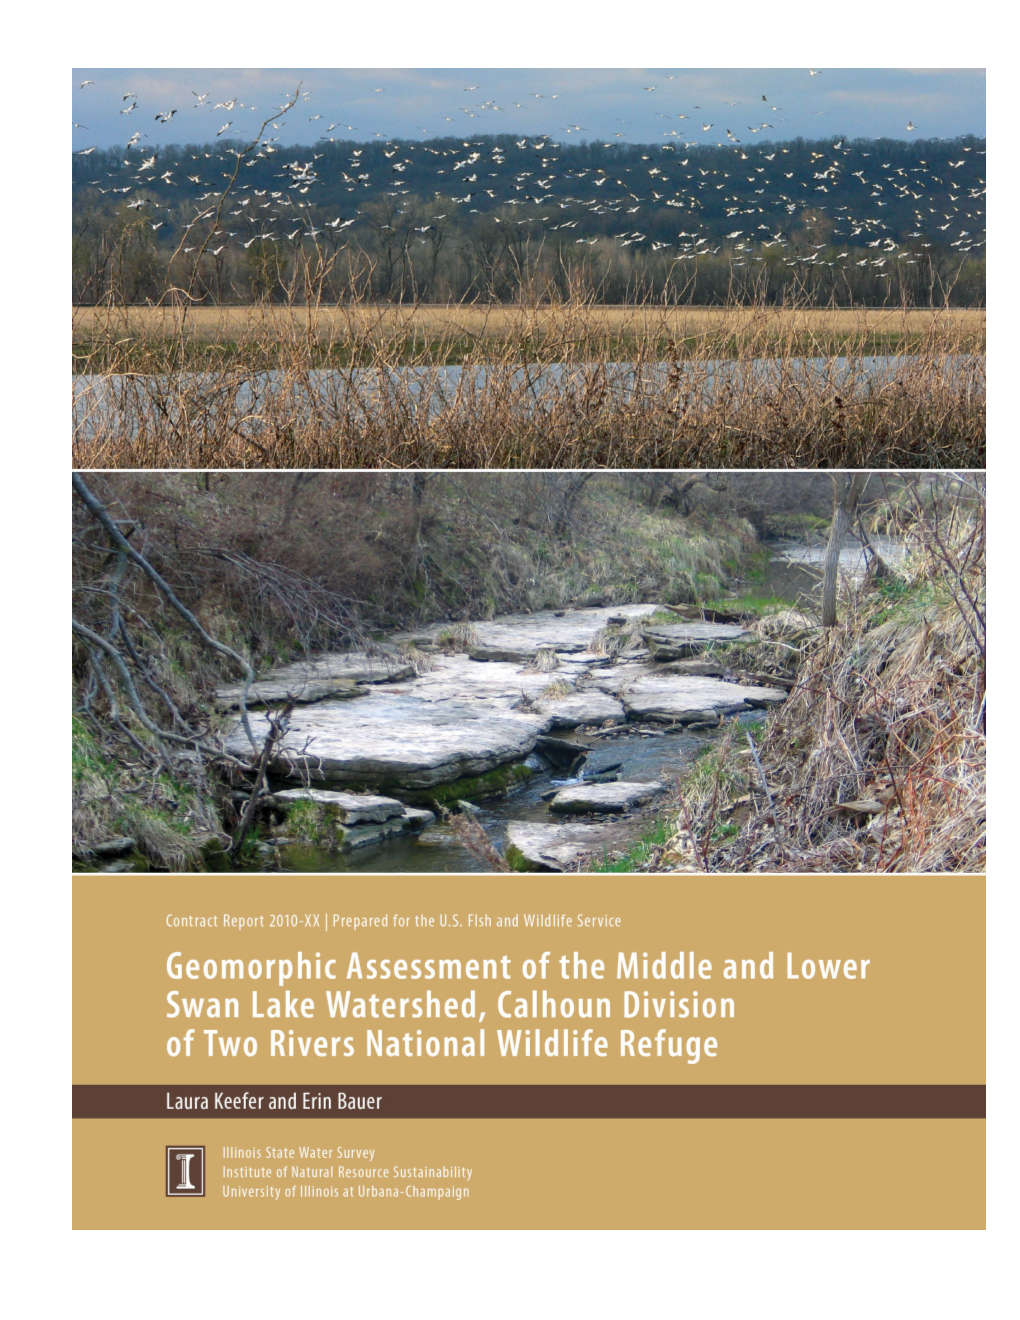 Geomorphic Assessmentof the Middle and Lower Swan Lake Watershed, Calhoun Division Of